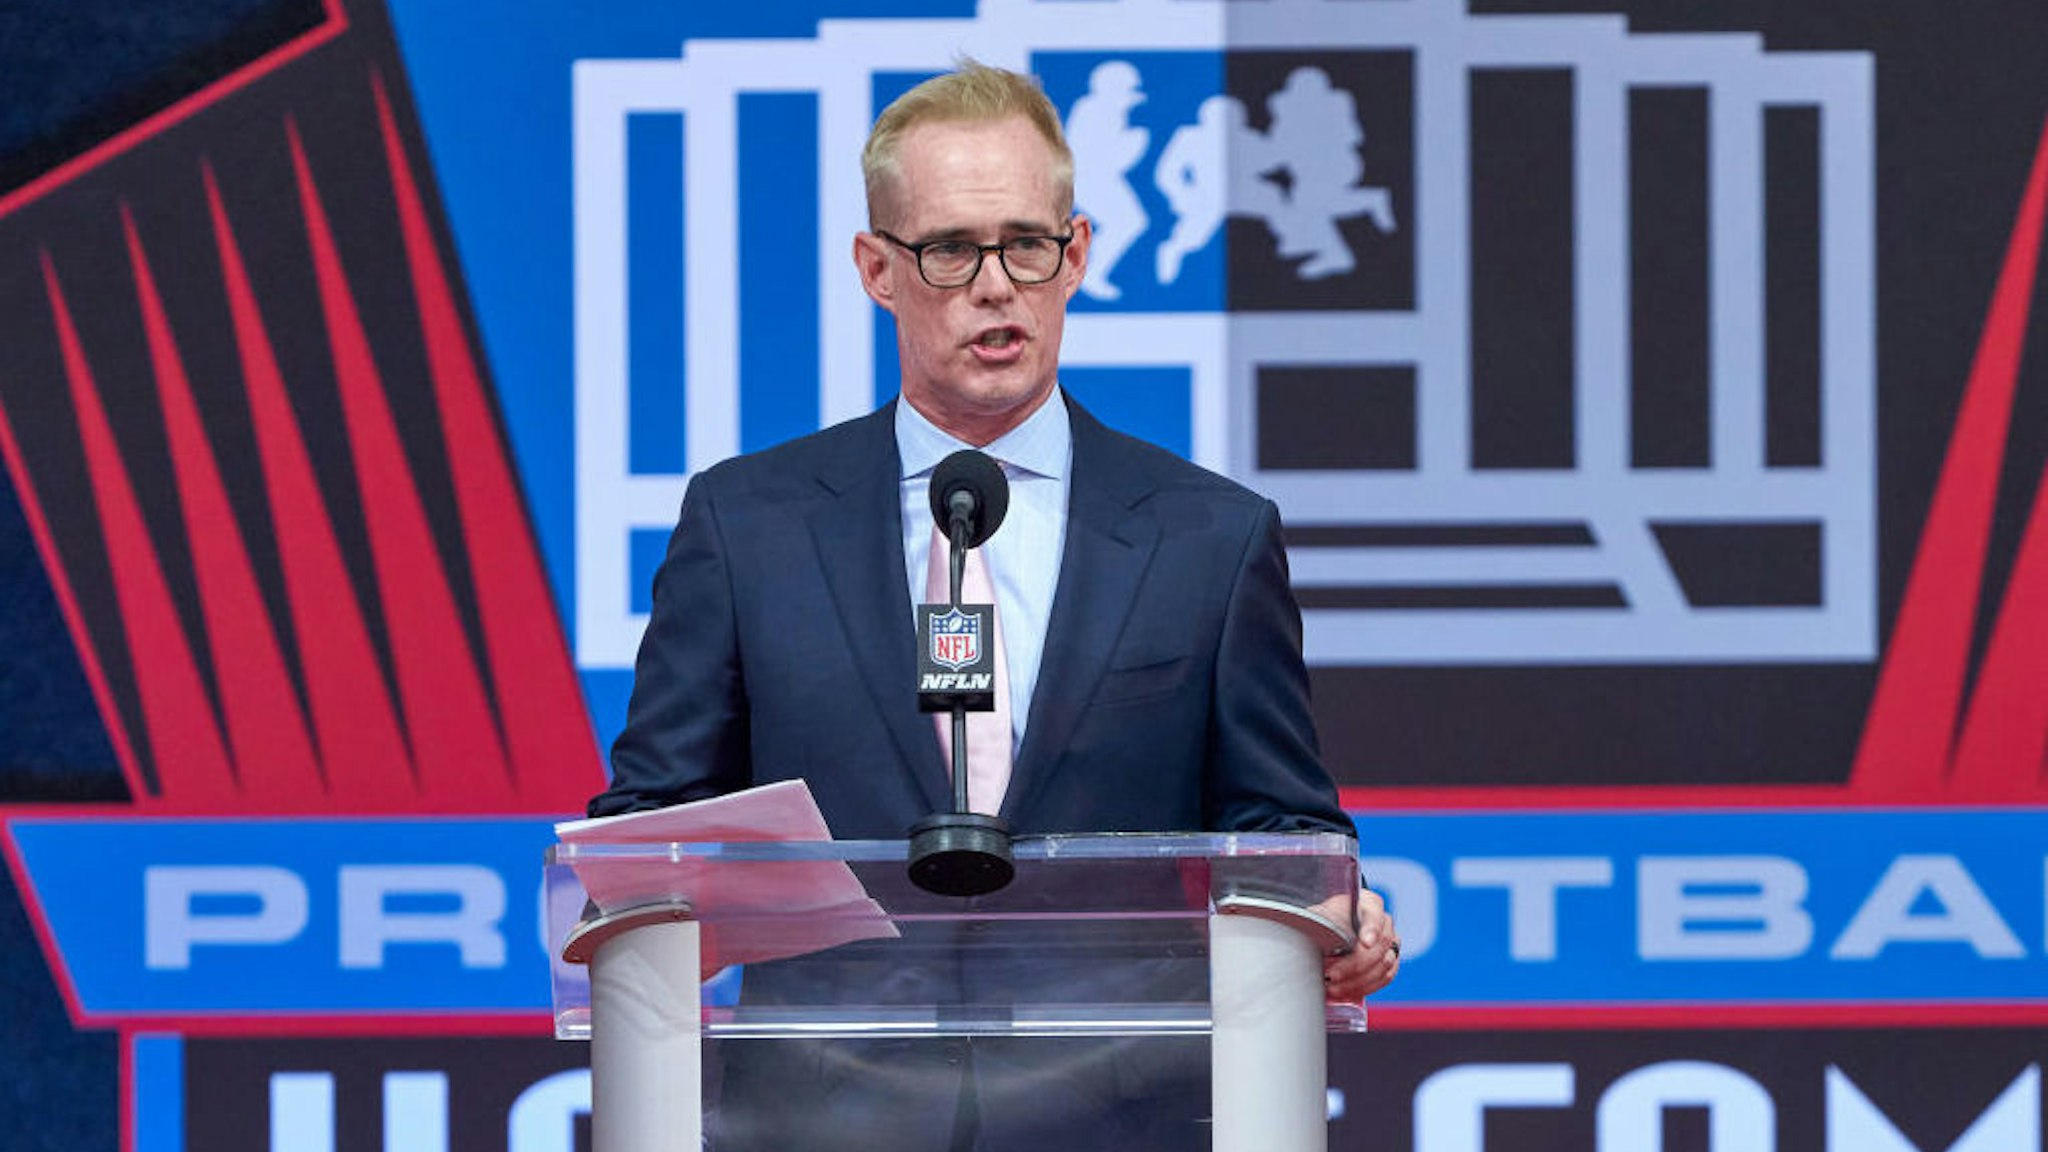 CANTON, OH - AUGUST 07: Fox Sports NFL Analyst Joe Buck speaks after receiving the Pete Rozelle Radio - Television award during the Pro Football HOF Centennial Class of 2020 enshrinement ceremonies on August 7, 2021 at Tom Benson Hall of Fame Stadium, in Canton, OH. (Photo by MSA/Icon Sportswire)